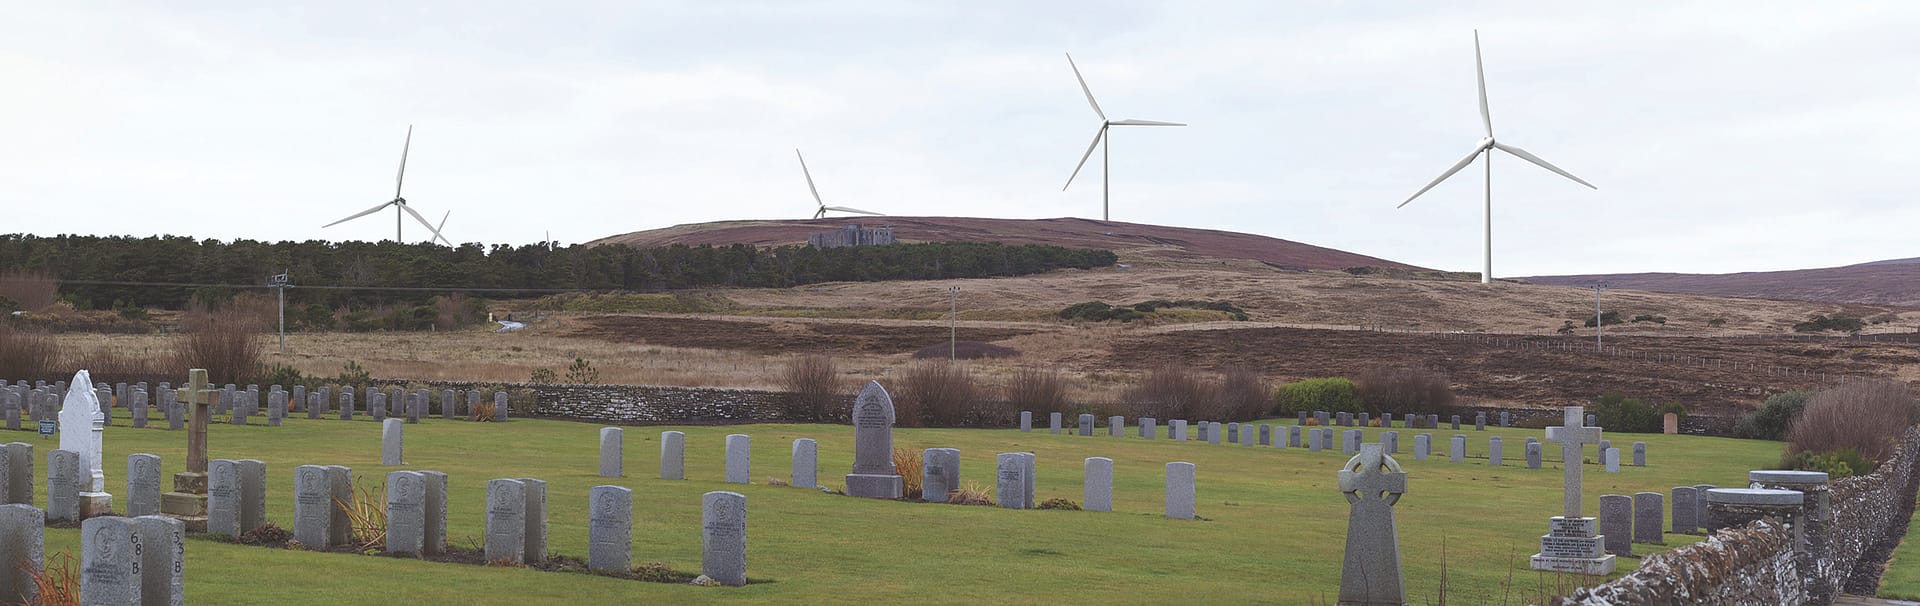 View from Lyness Naval Cemetery to the Hoy Wind Farm.